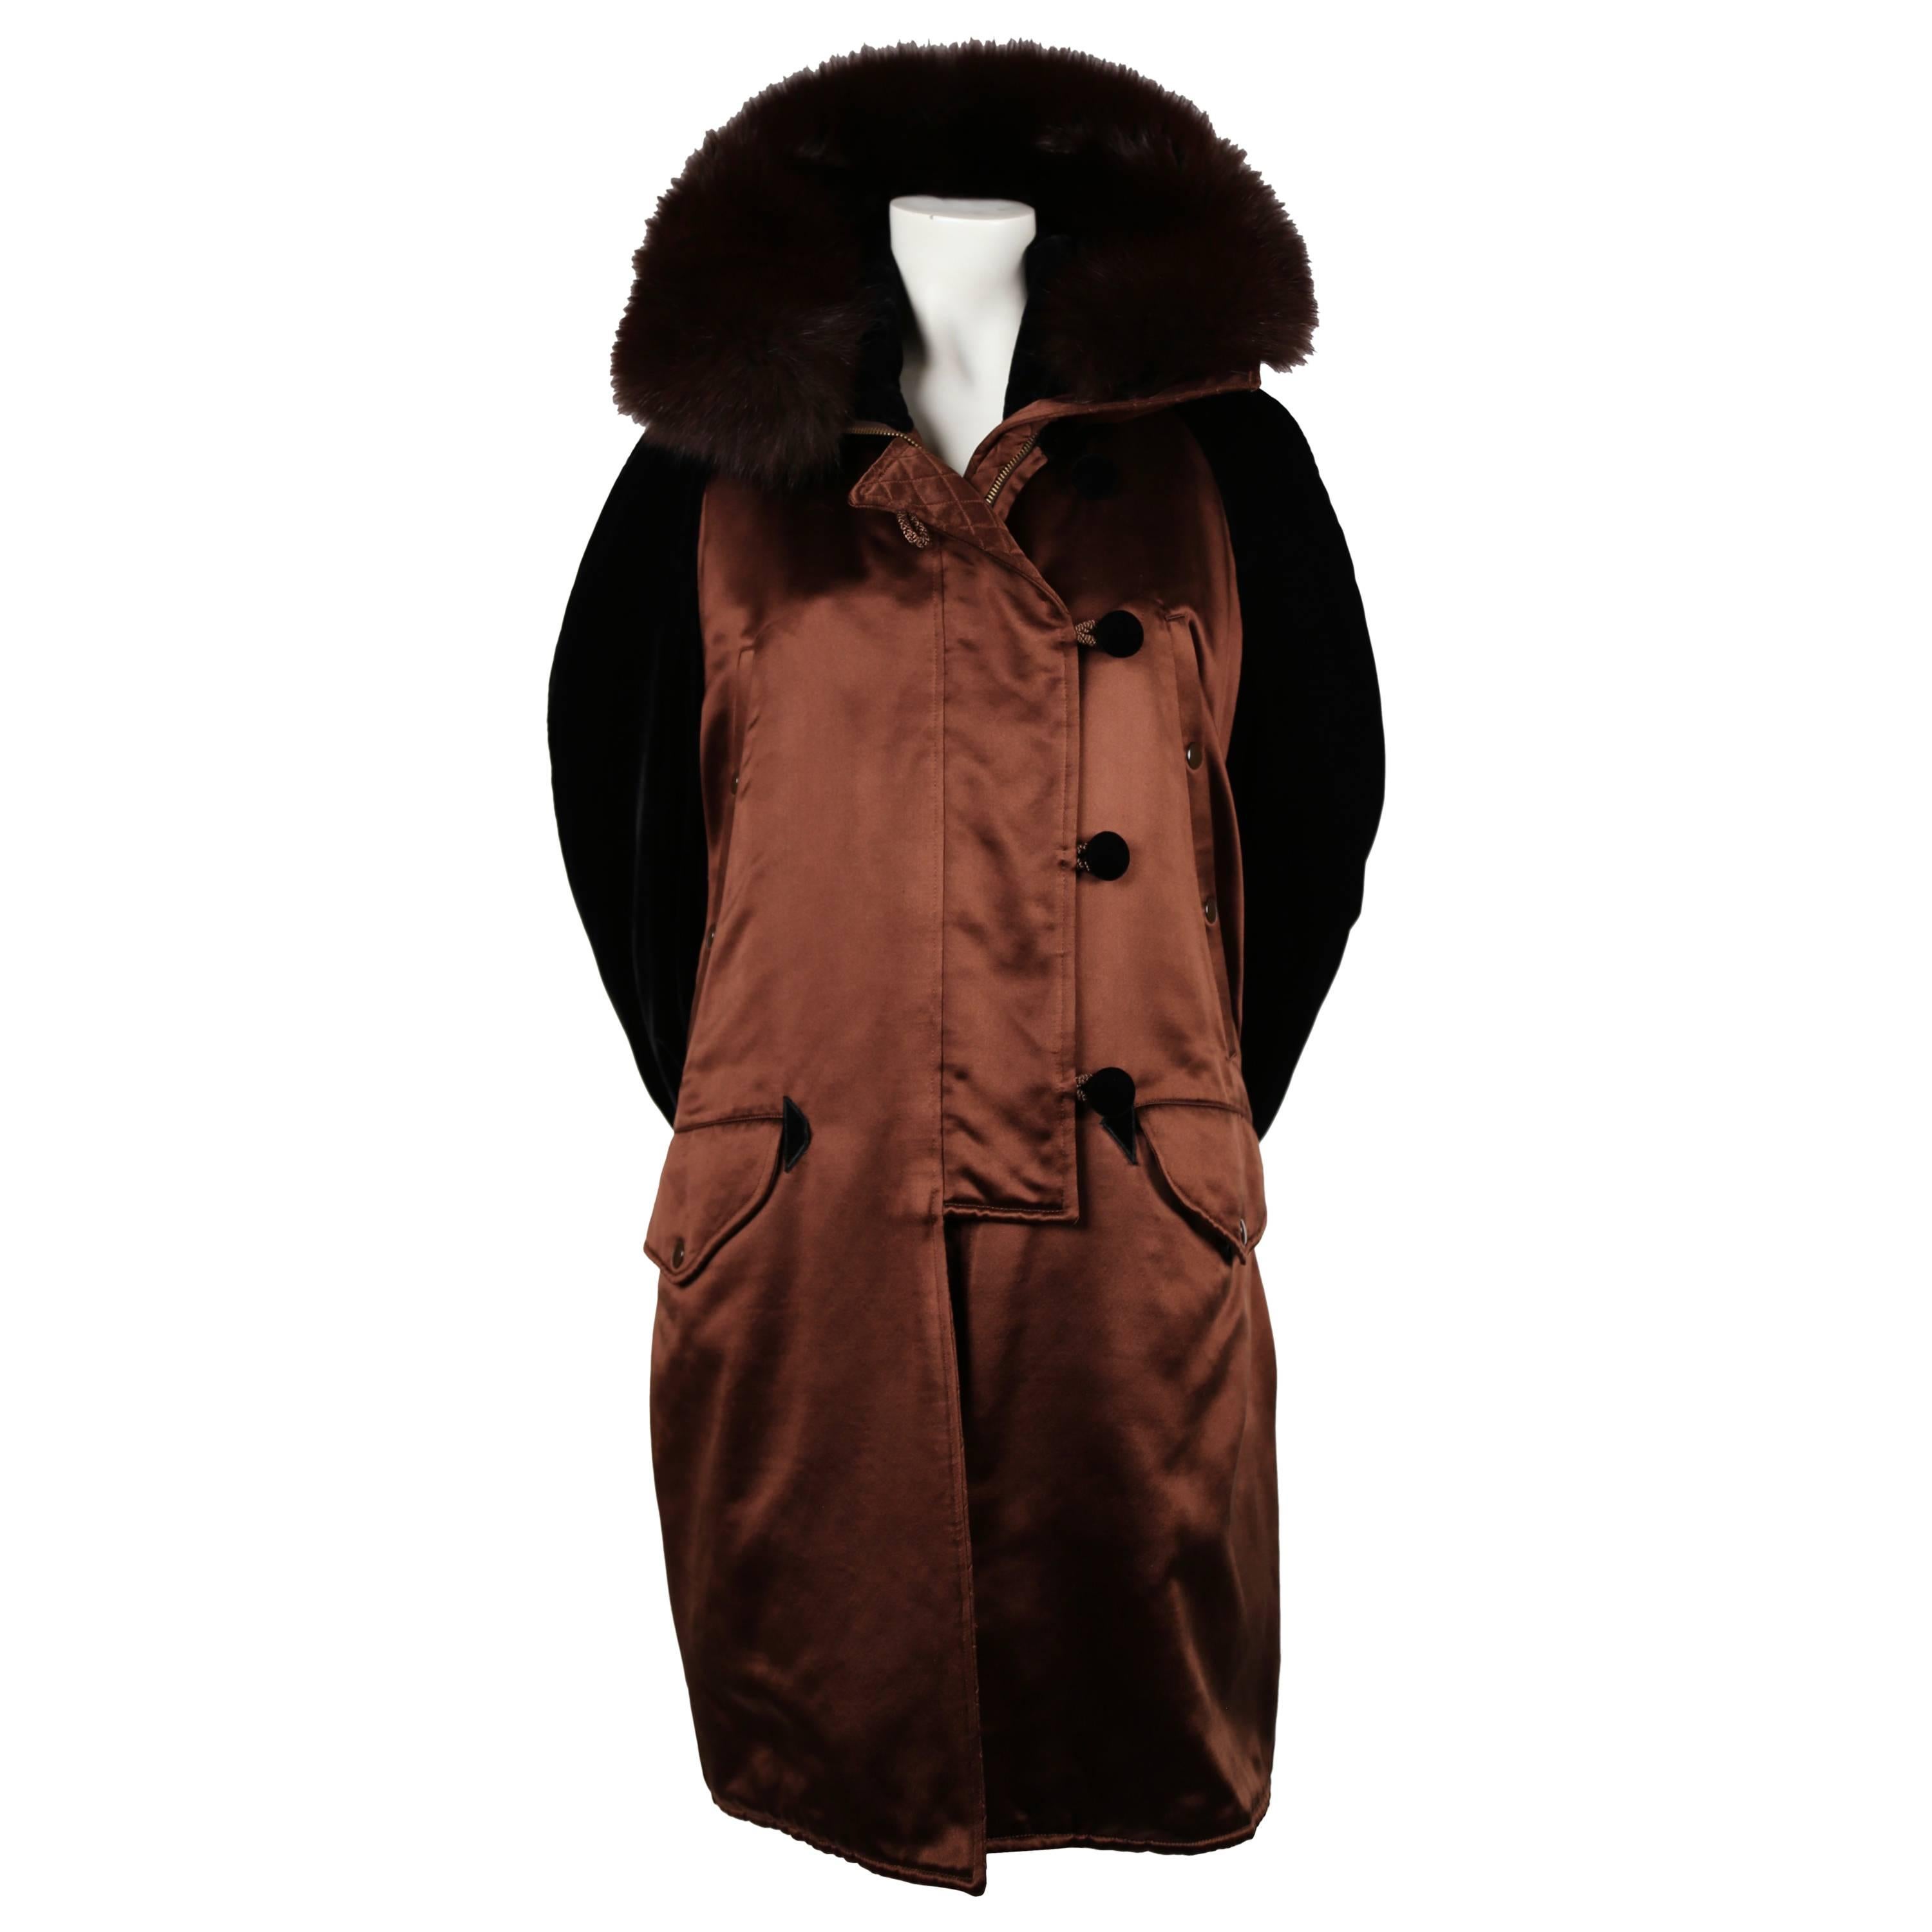 Christian Lacroix haute couture silk quilted parka coat with fox fur, 1990s 